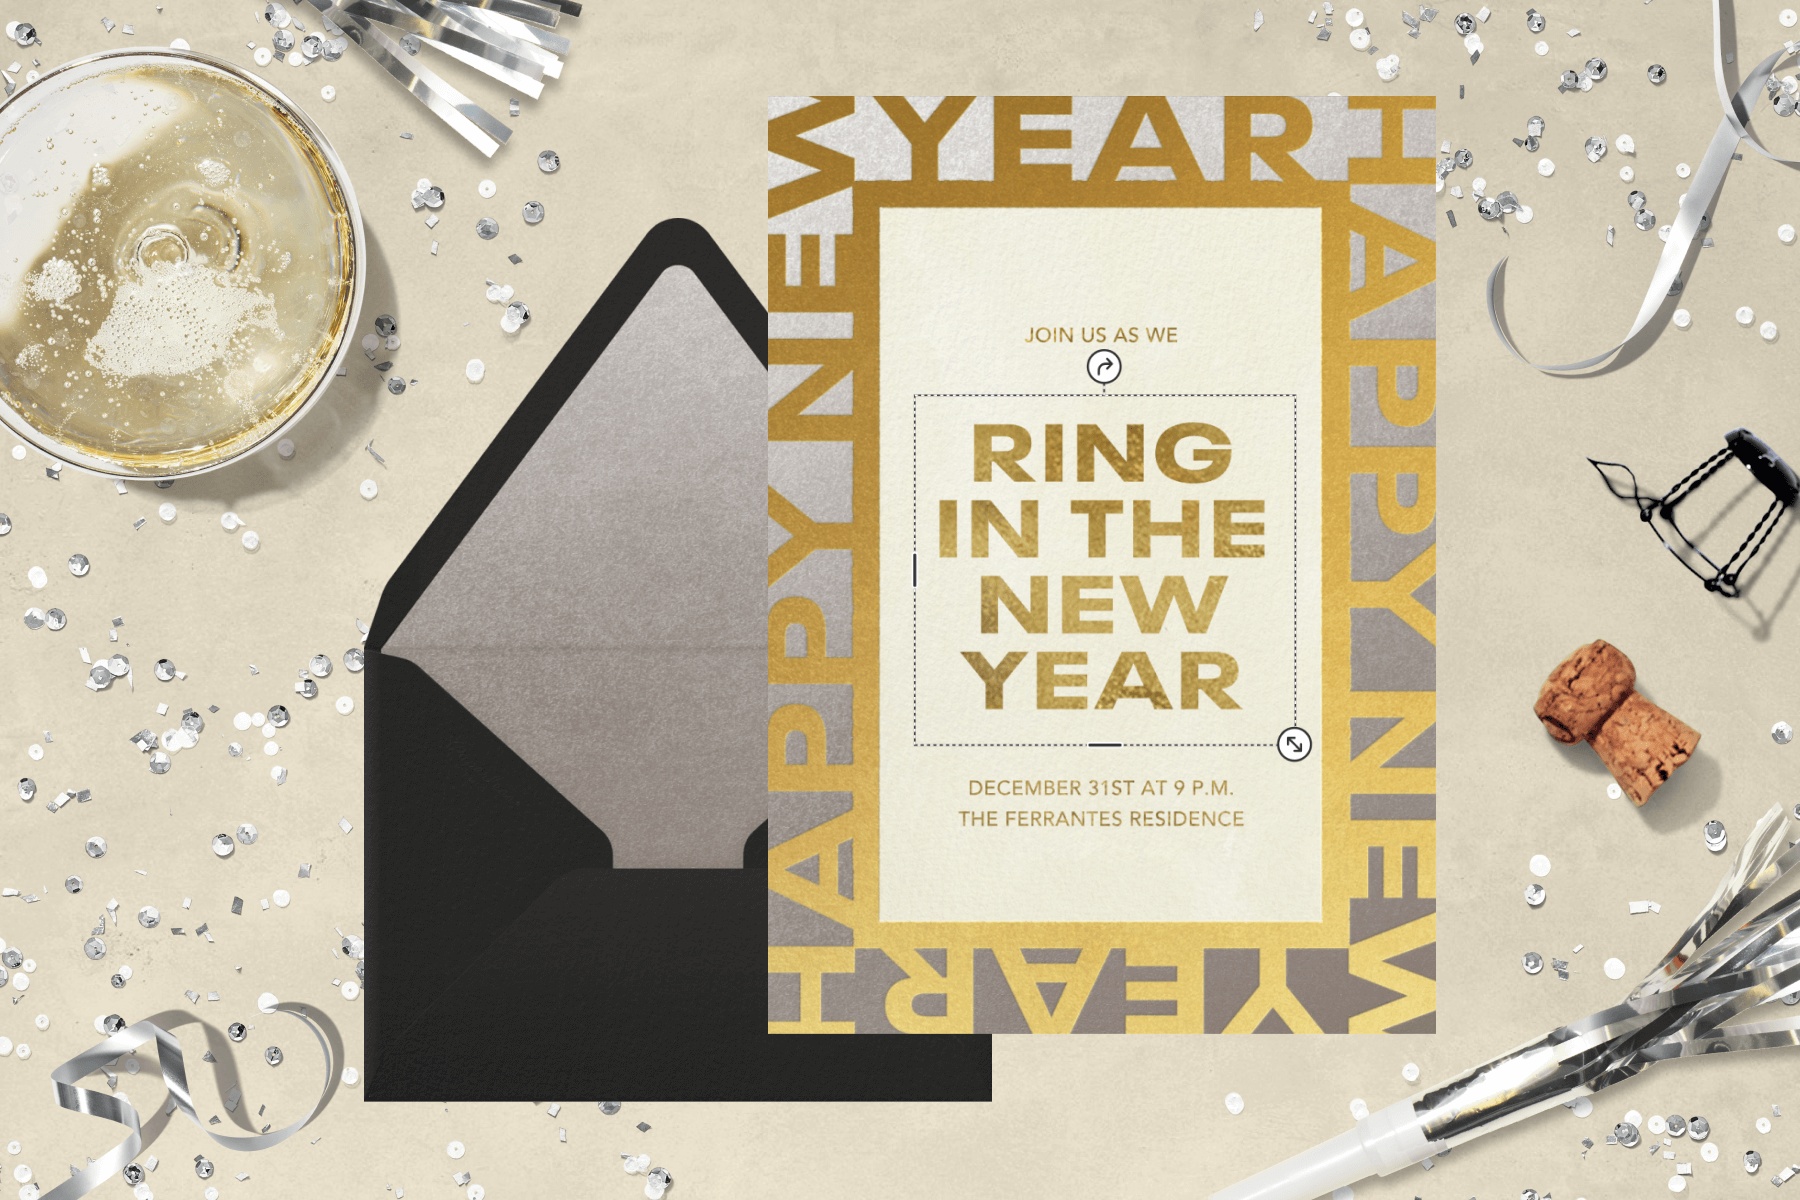 An invitation reads HAPPY NEW YEAR in gold around the border and is surrounded by glitter and party favors.